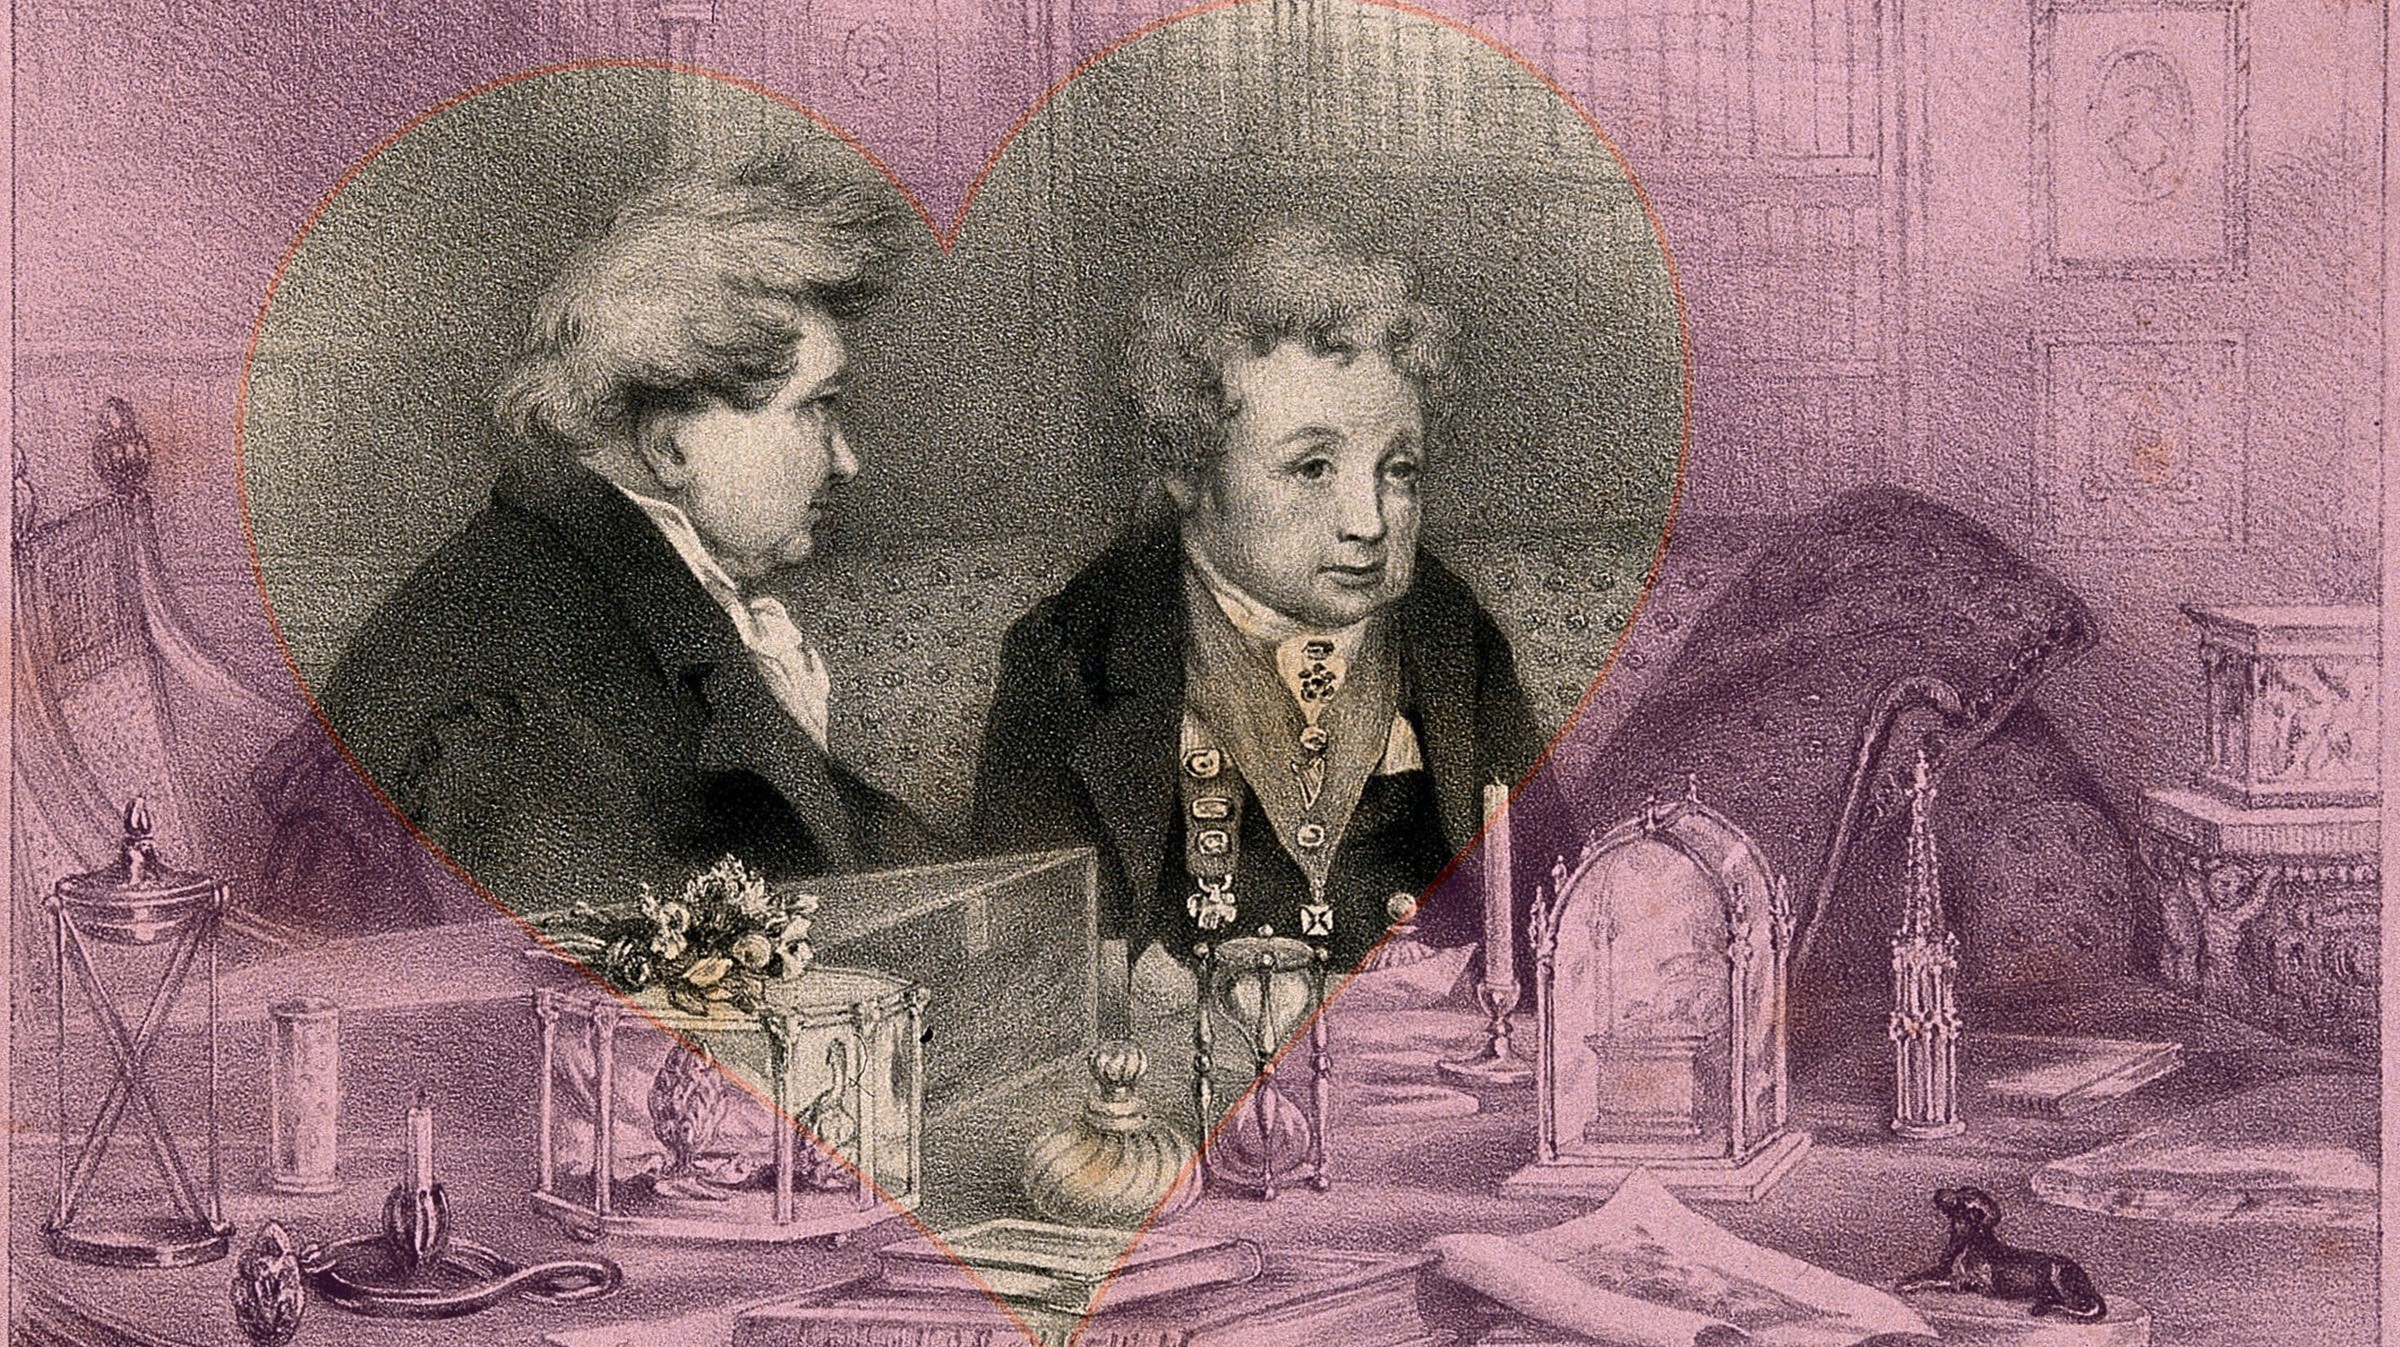 18th Century Lesbians - The 18th Century Lesbian Icons Everyone Assumed Were Just Close Gal Pals